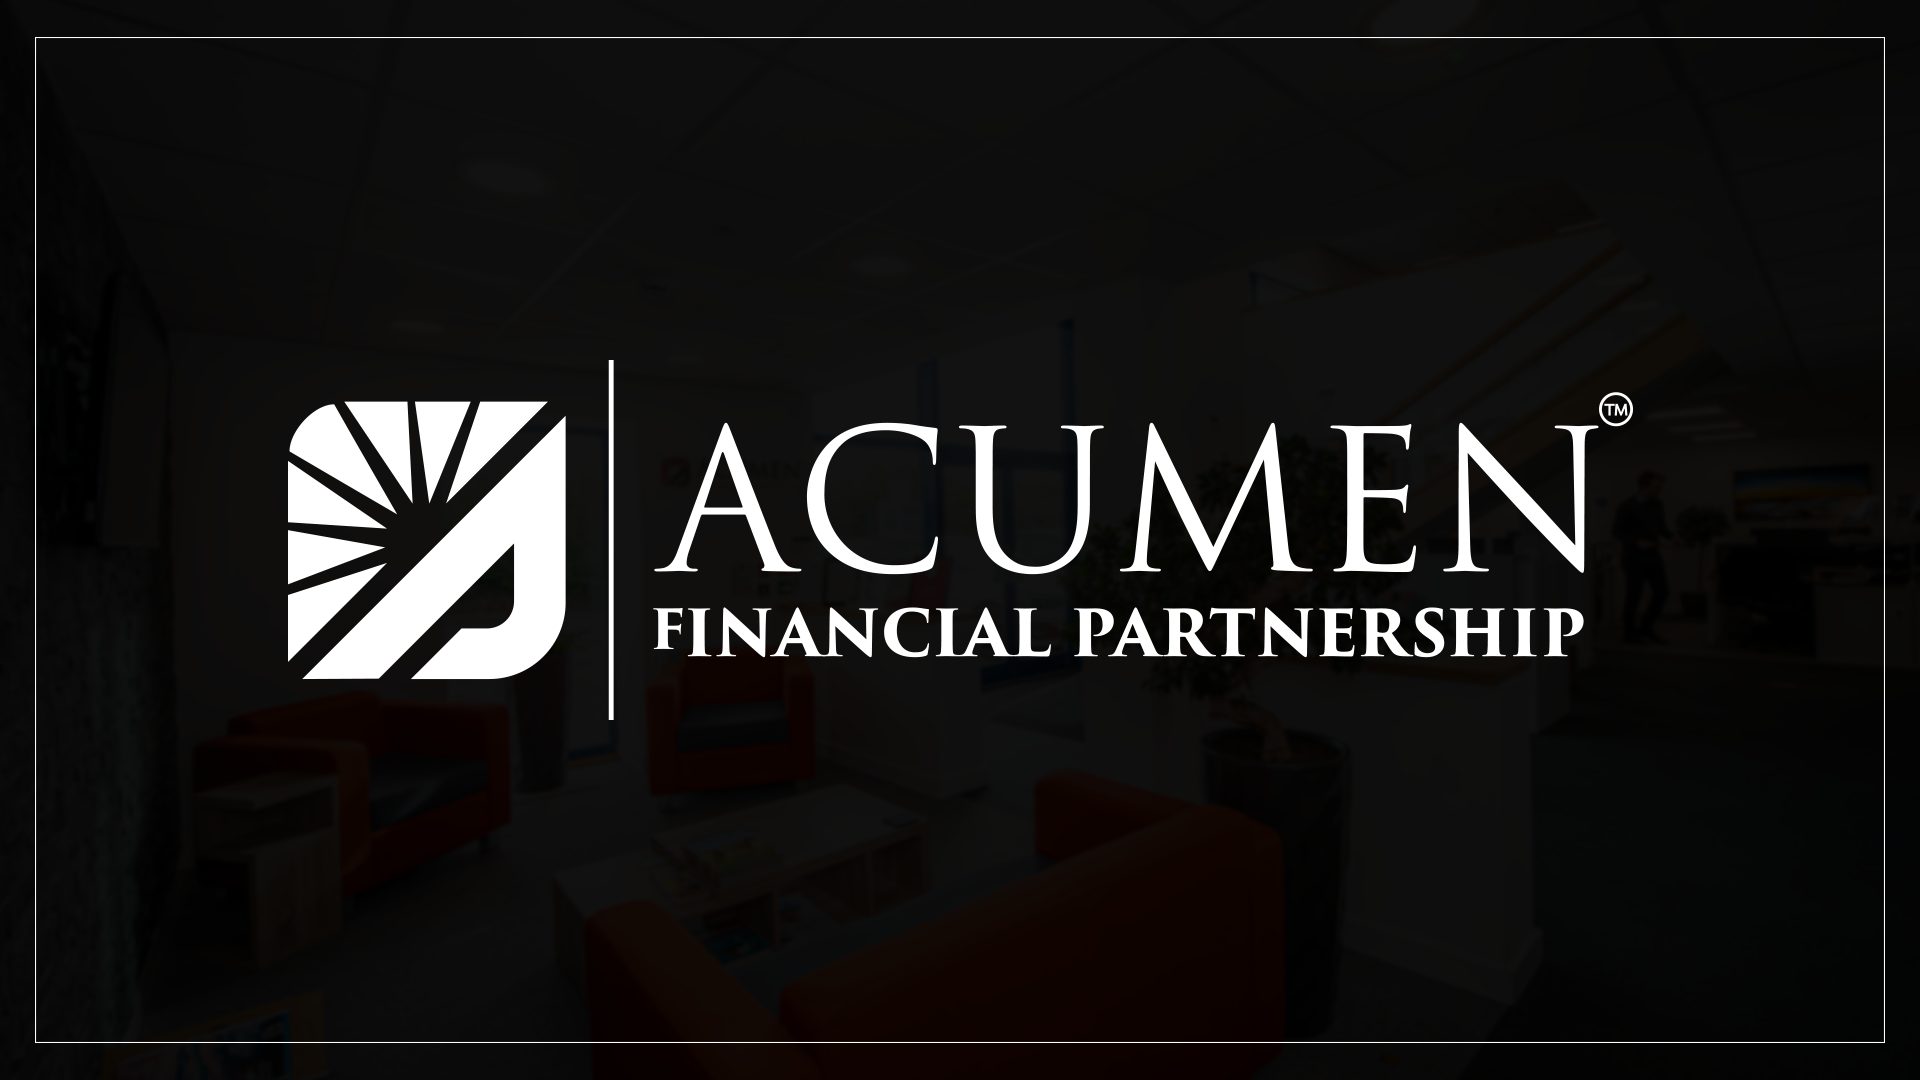 Acumen Financial Partnership is now trademarked